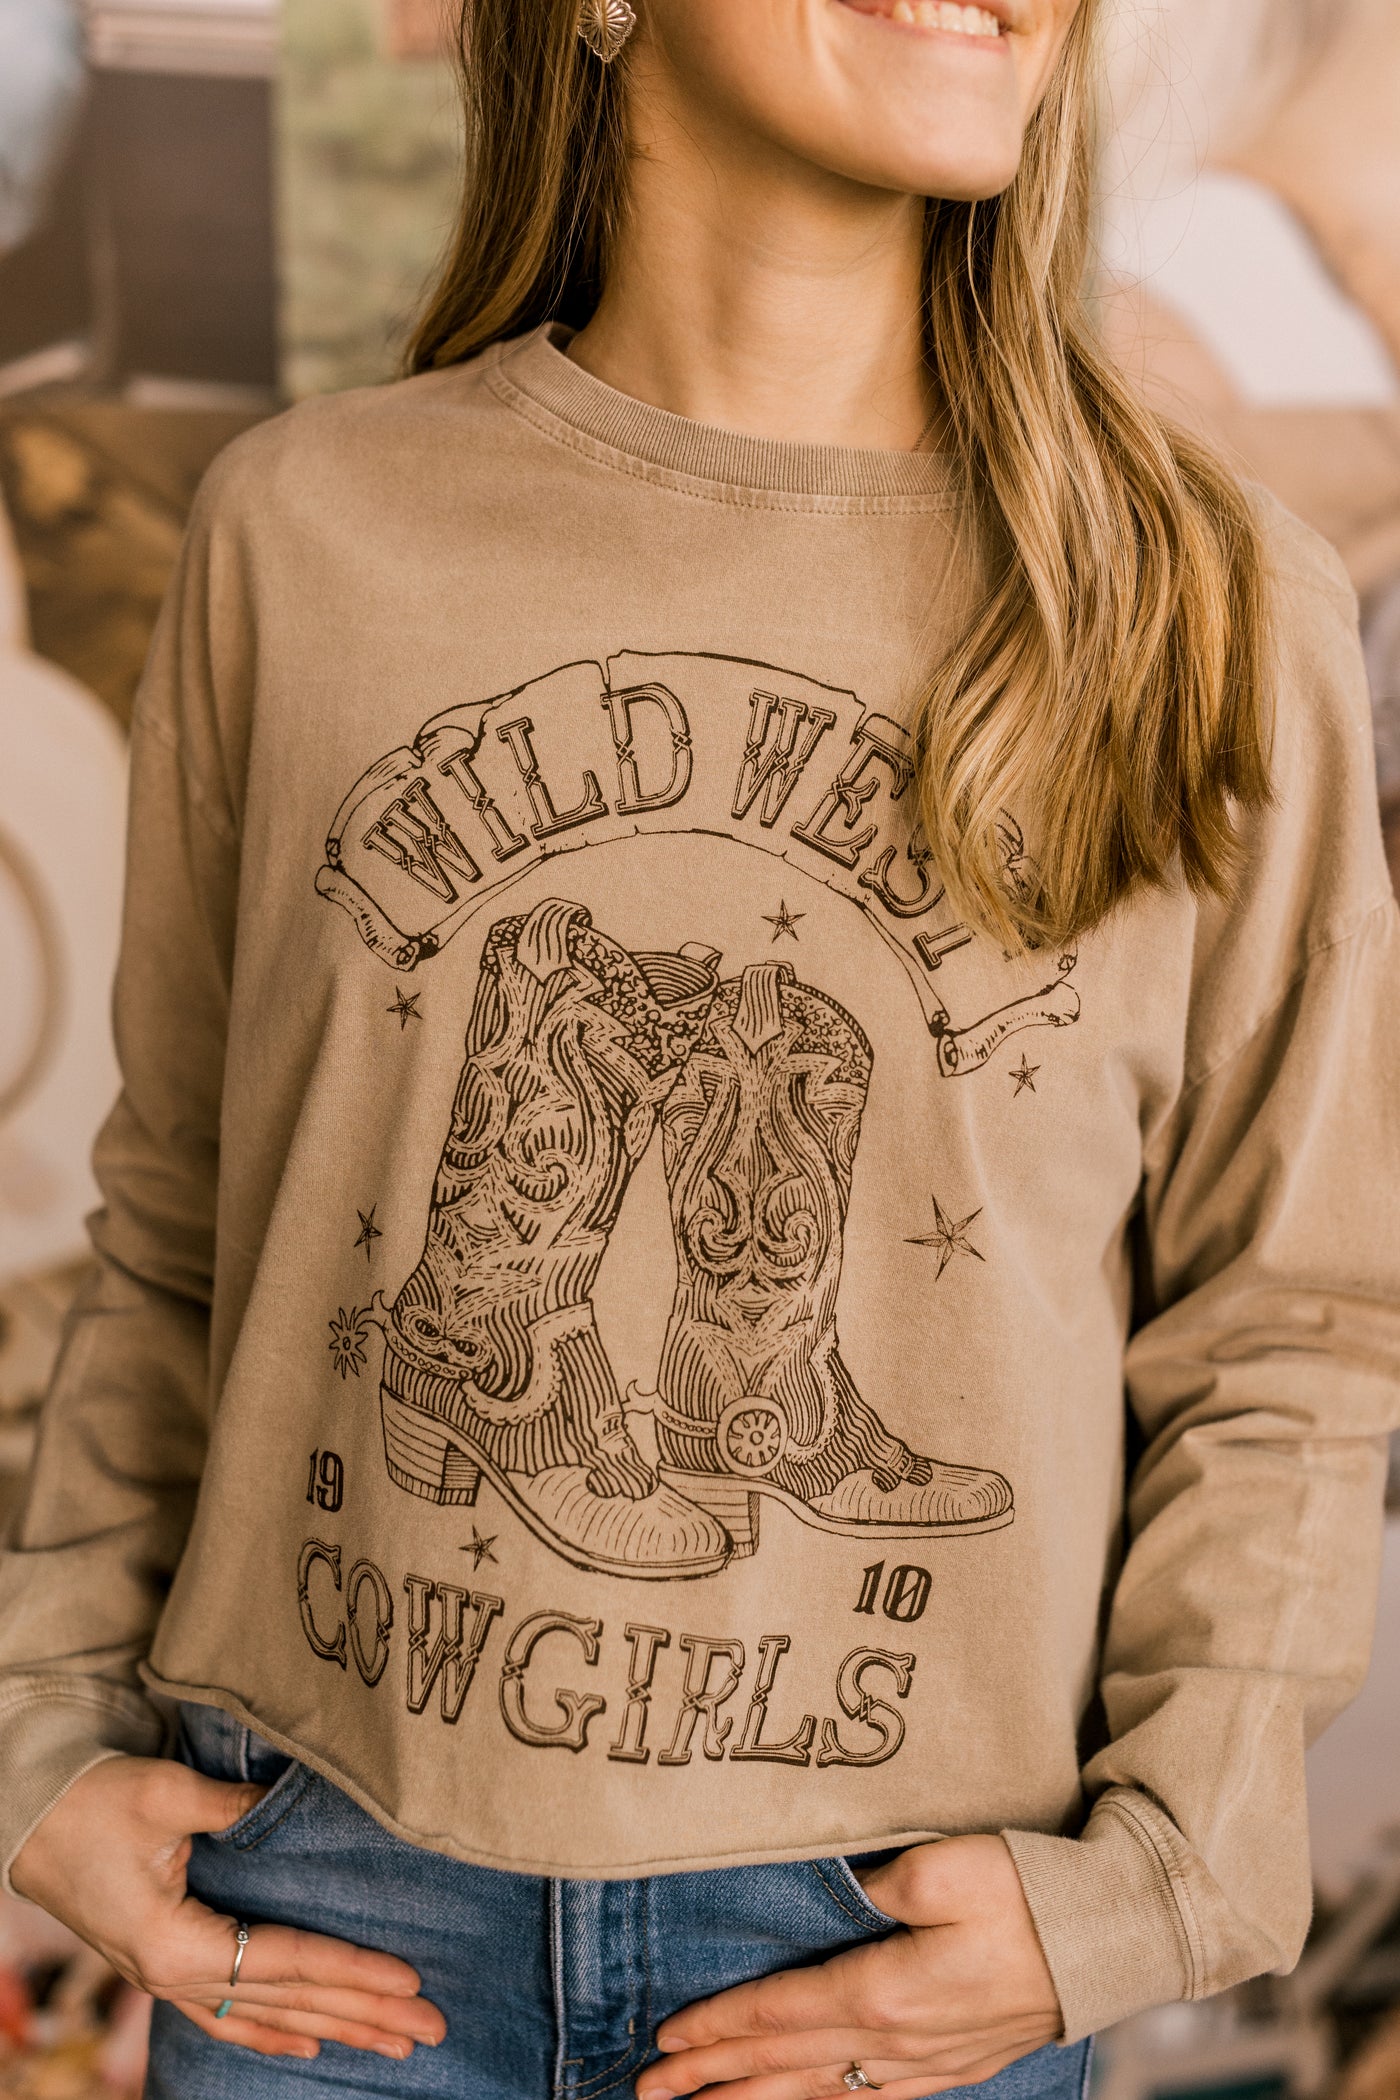 Seth Wild West Cowgirls Long Sleeve Top ✜ON SALE NOW | 40% OFF✜